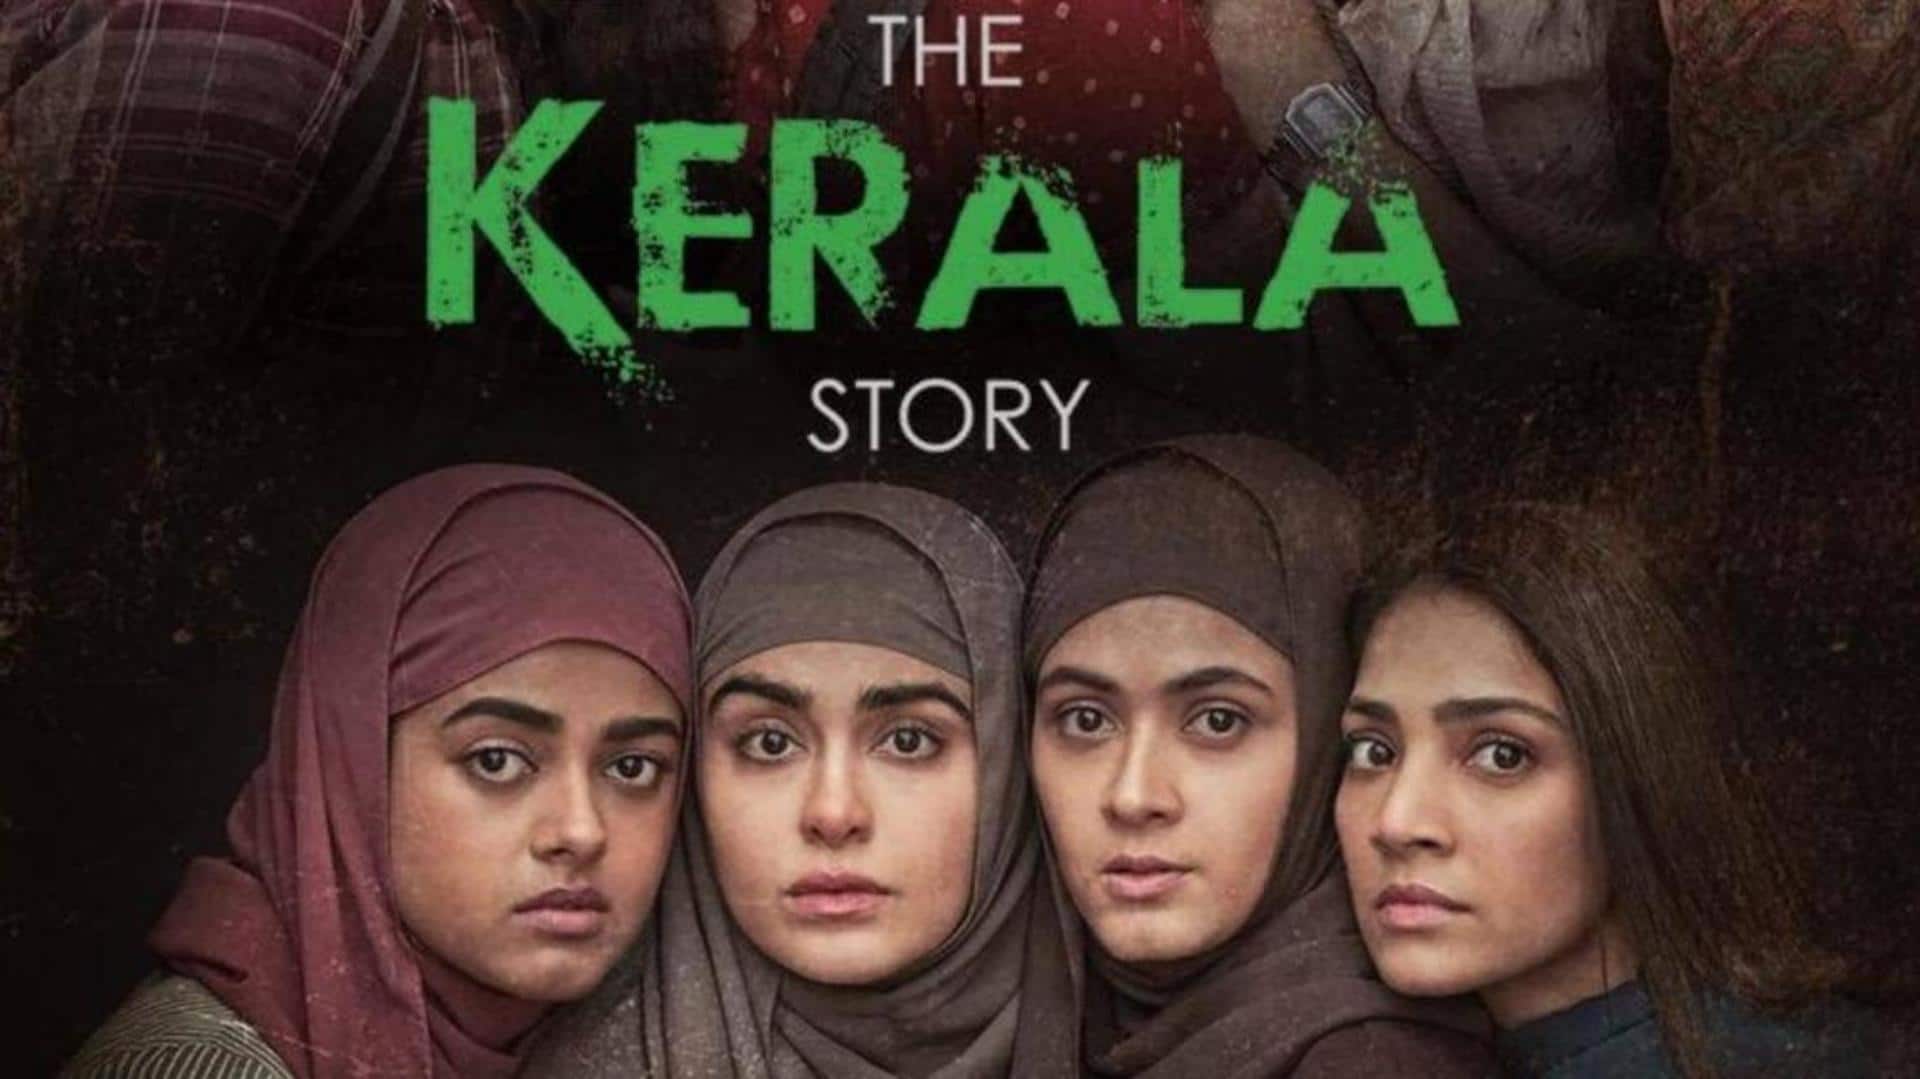 Box office: 'The Kerala Story' passes crucial Monday test